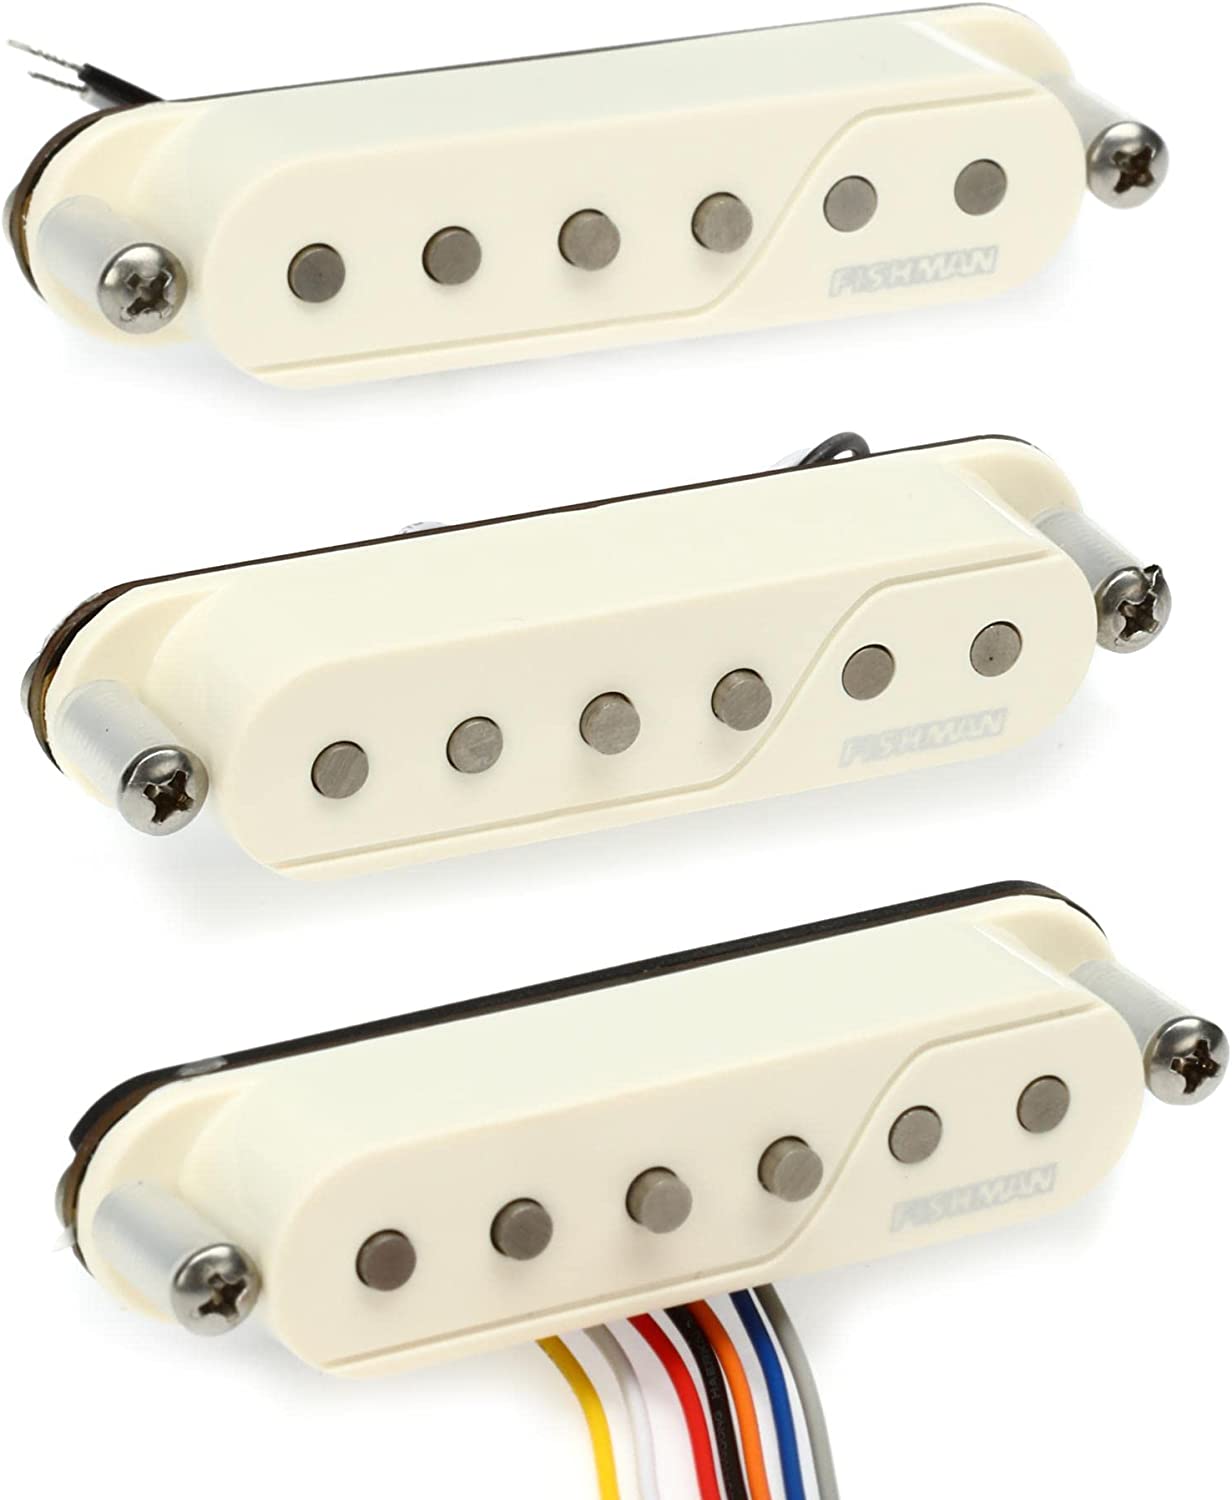 Fishman Fluence Single Coil Pickup on a white background